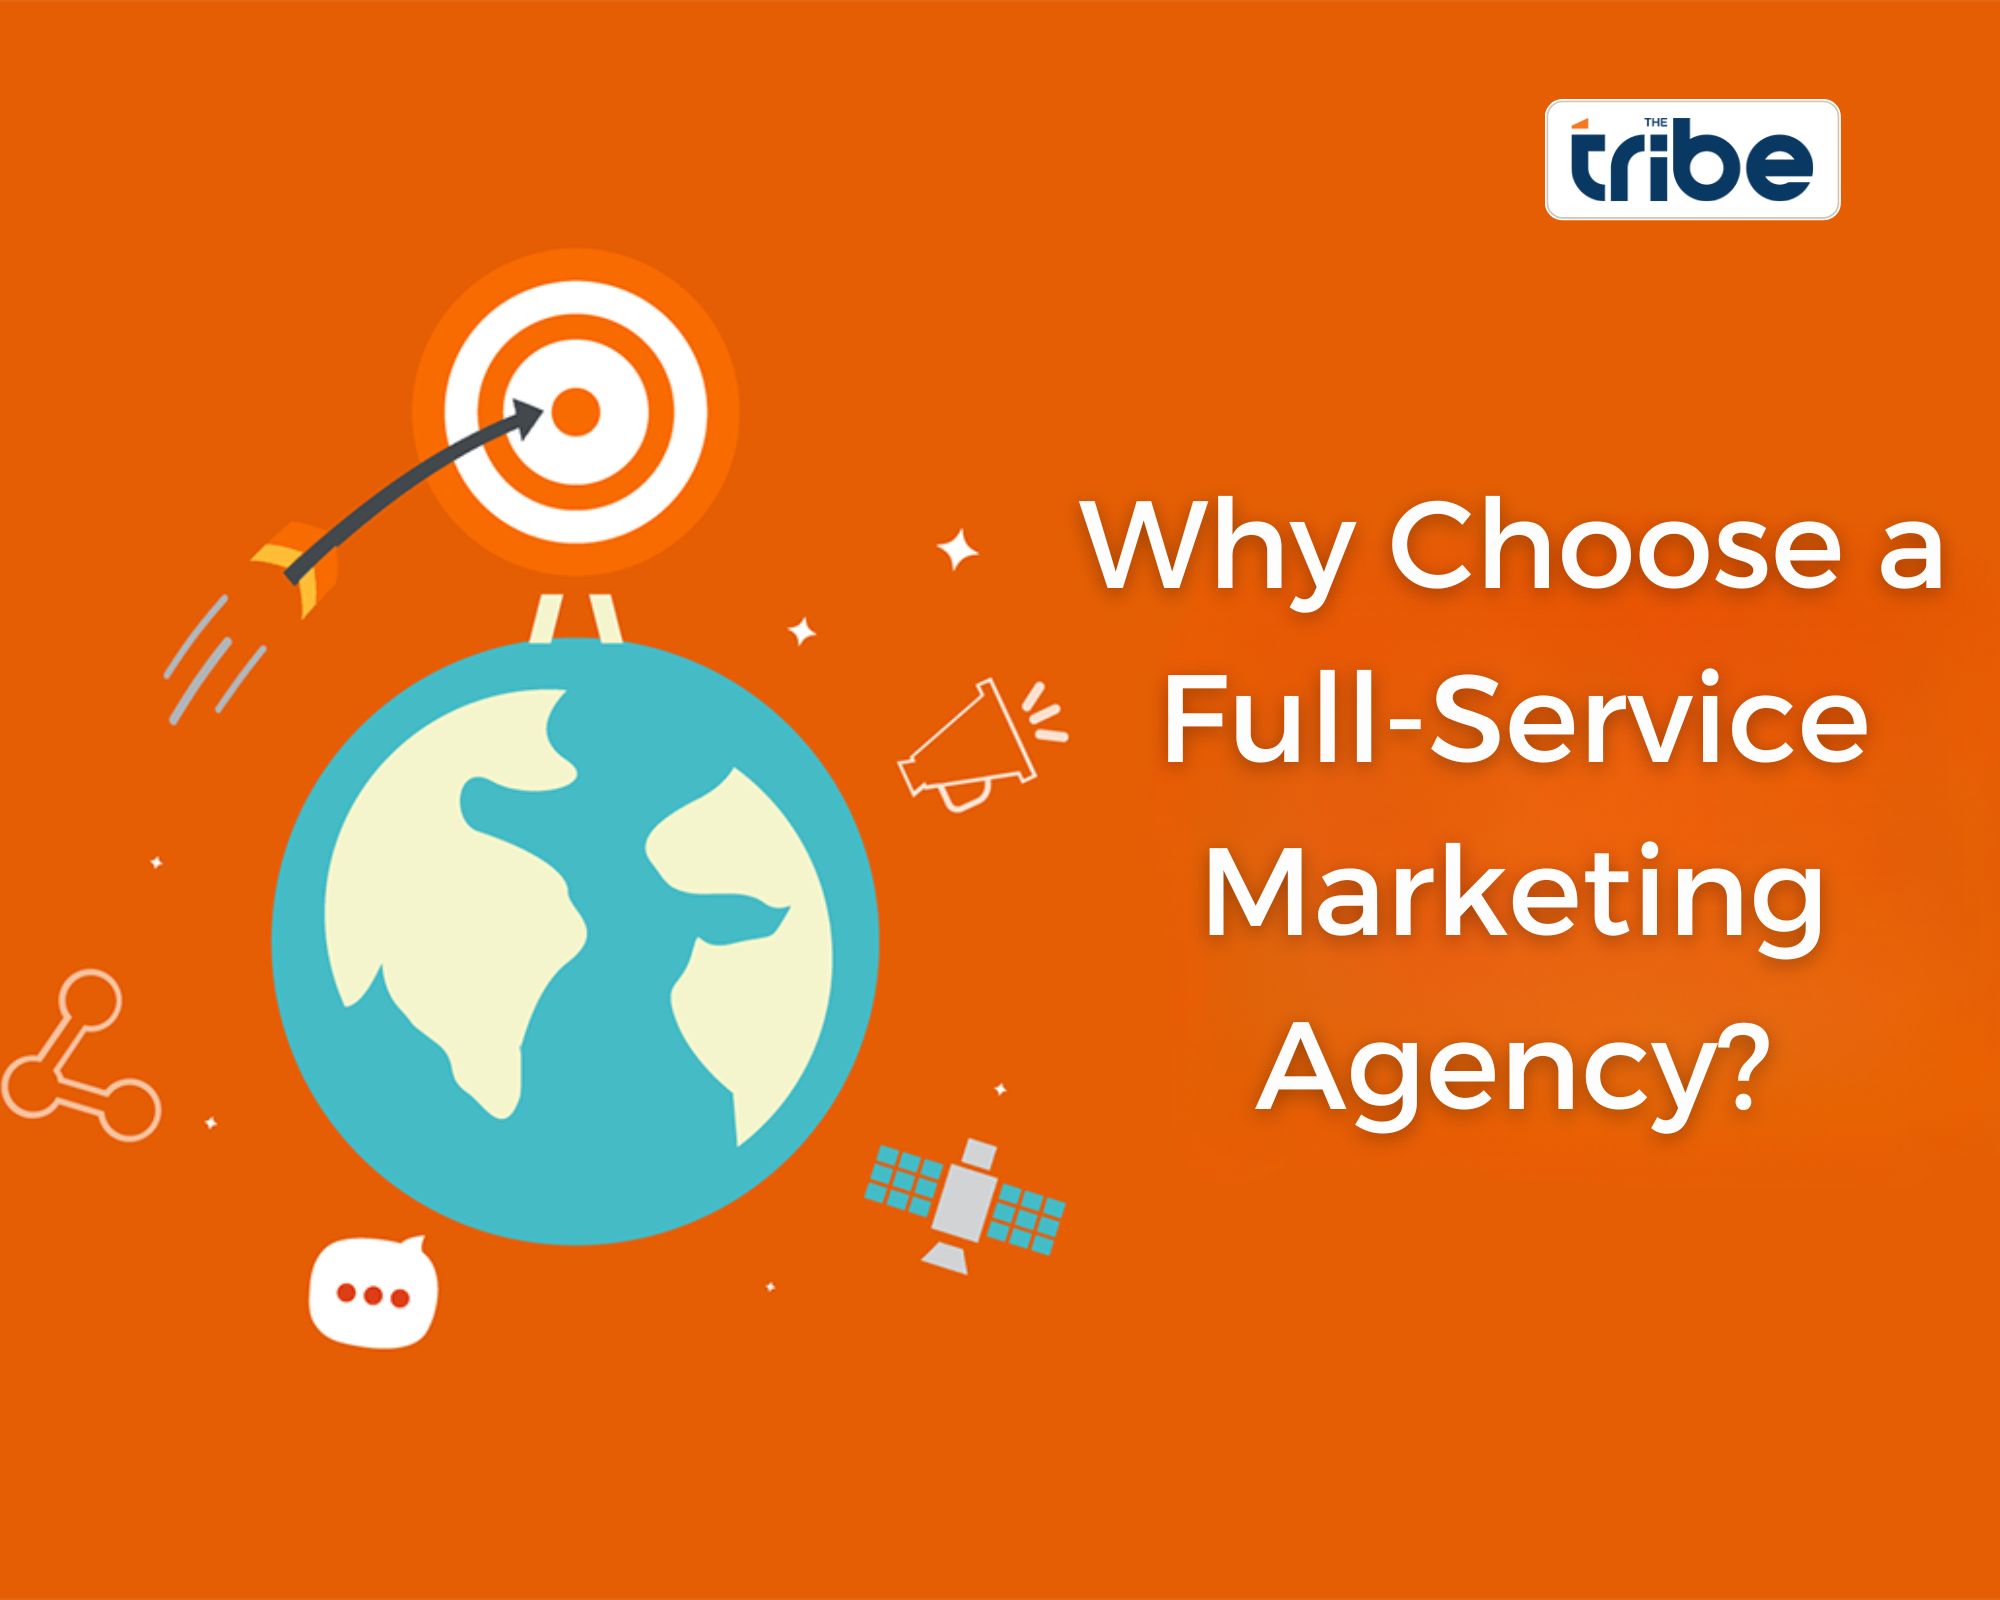 Why Choose a Full-Service Marketing Agency?